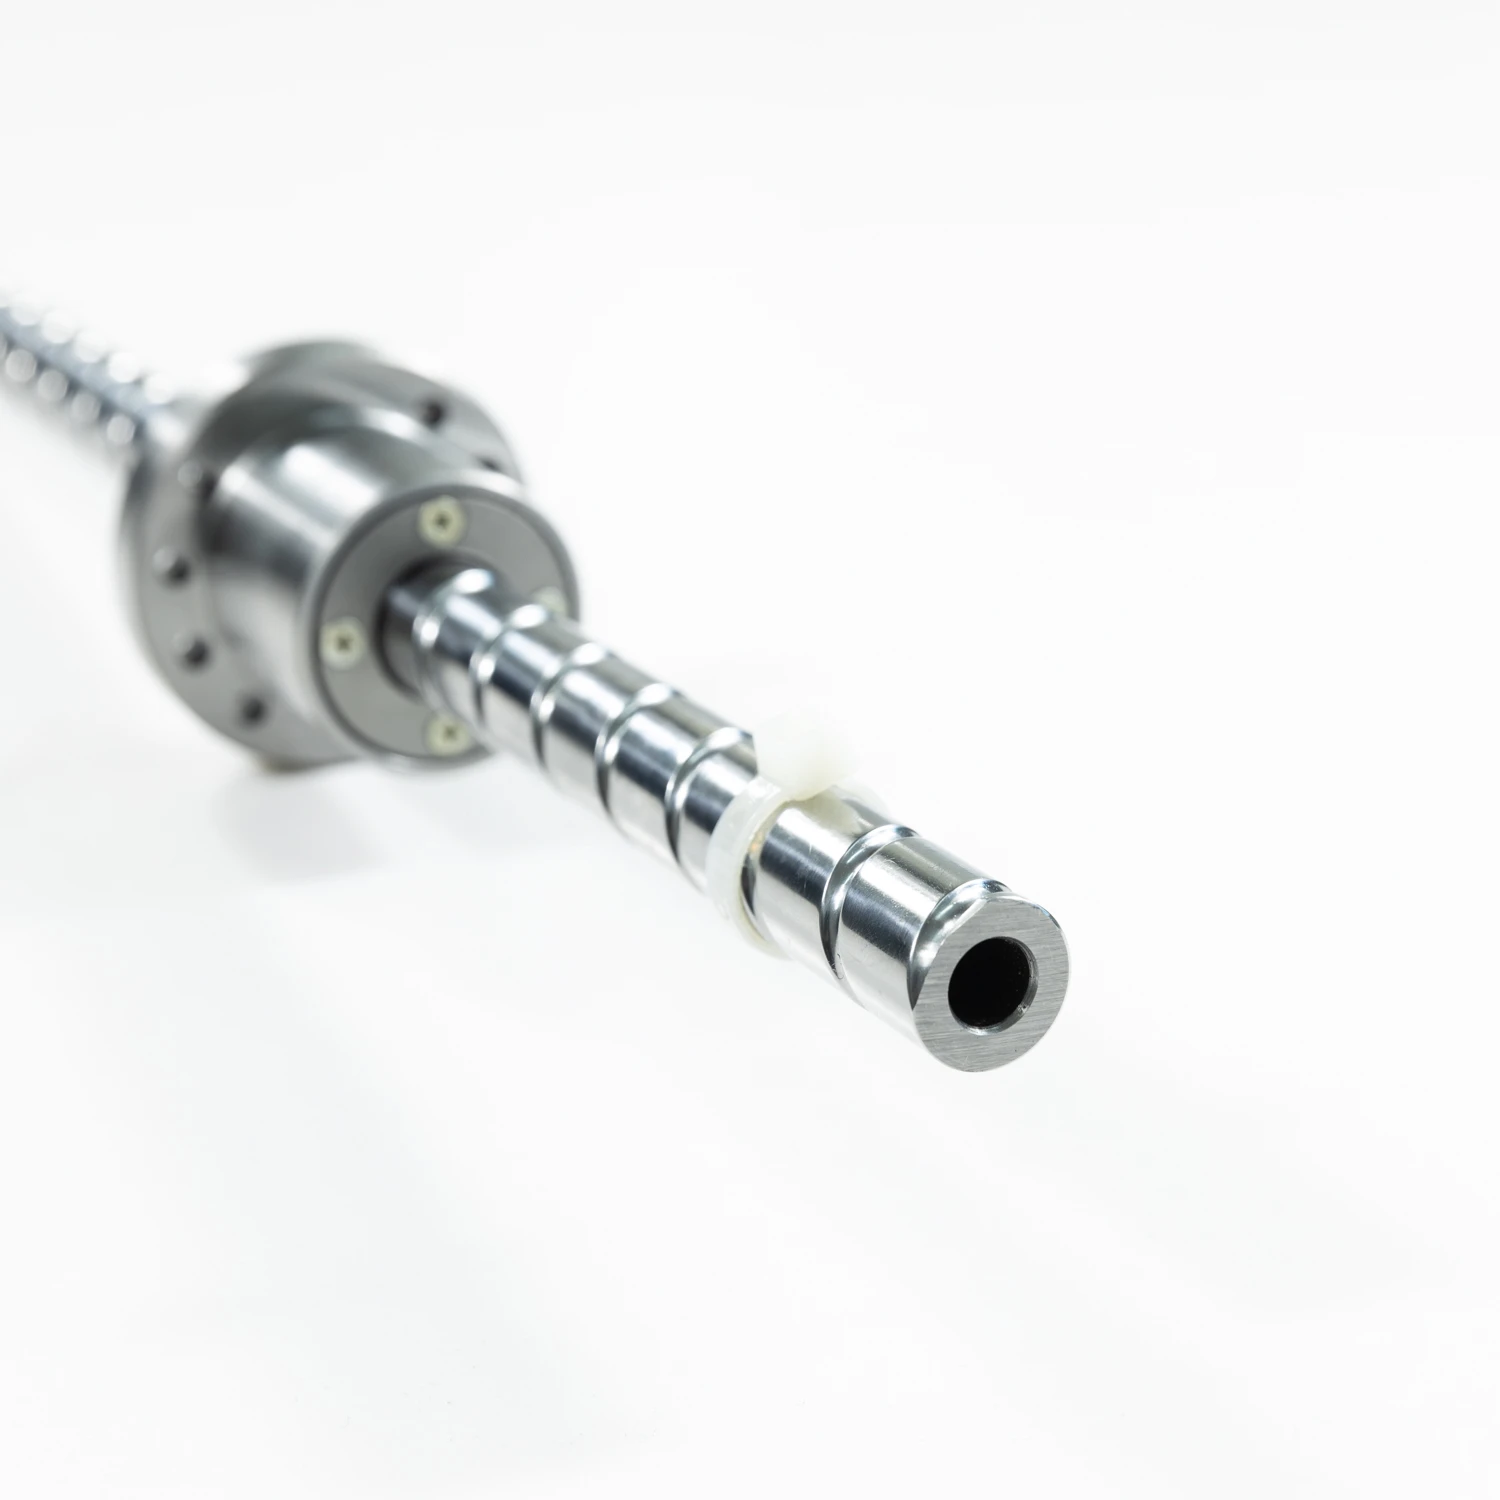 High quality right thread ball screw manufacturer